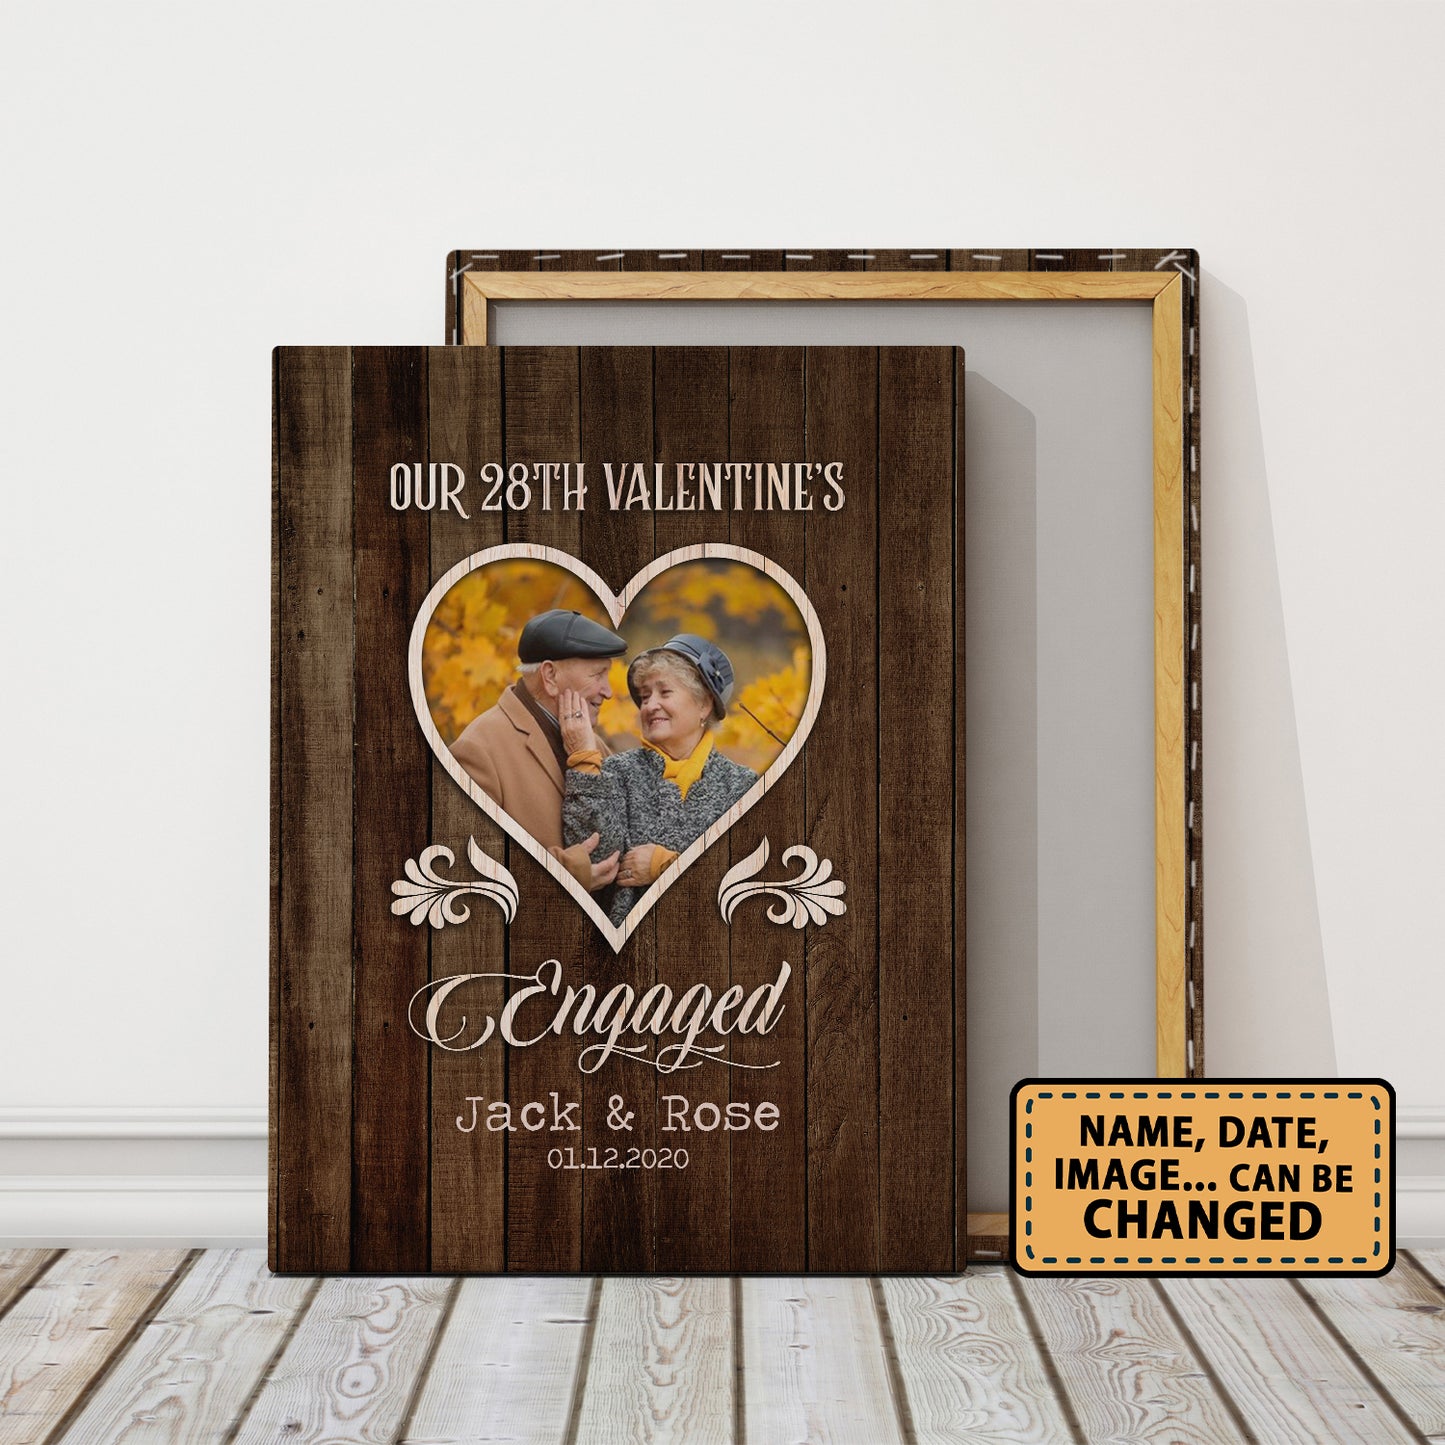 Our 28th Valentine’s Day Engaged Custom Image Anniversary Canvas